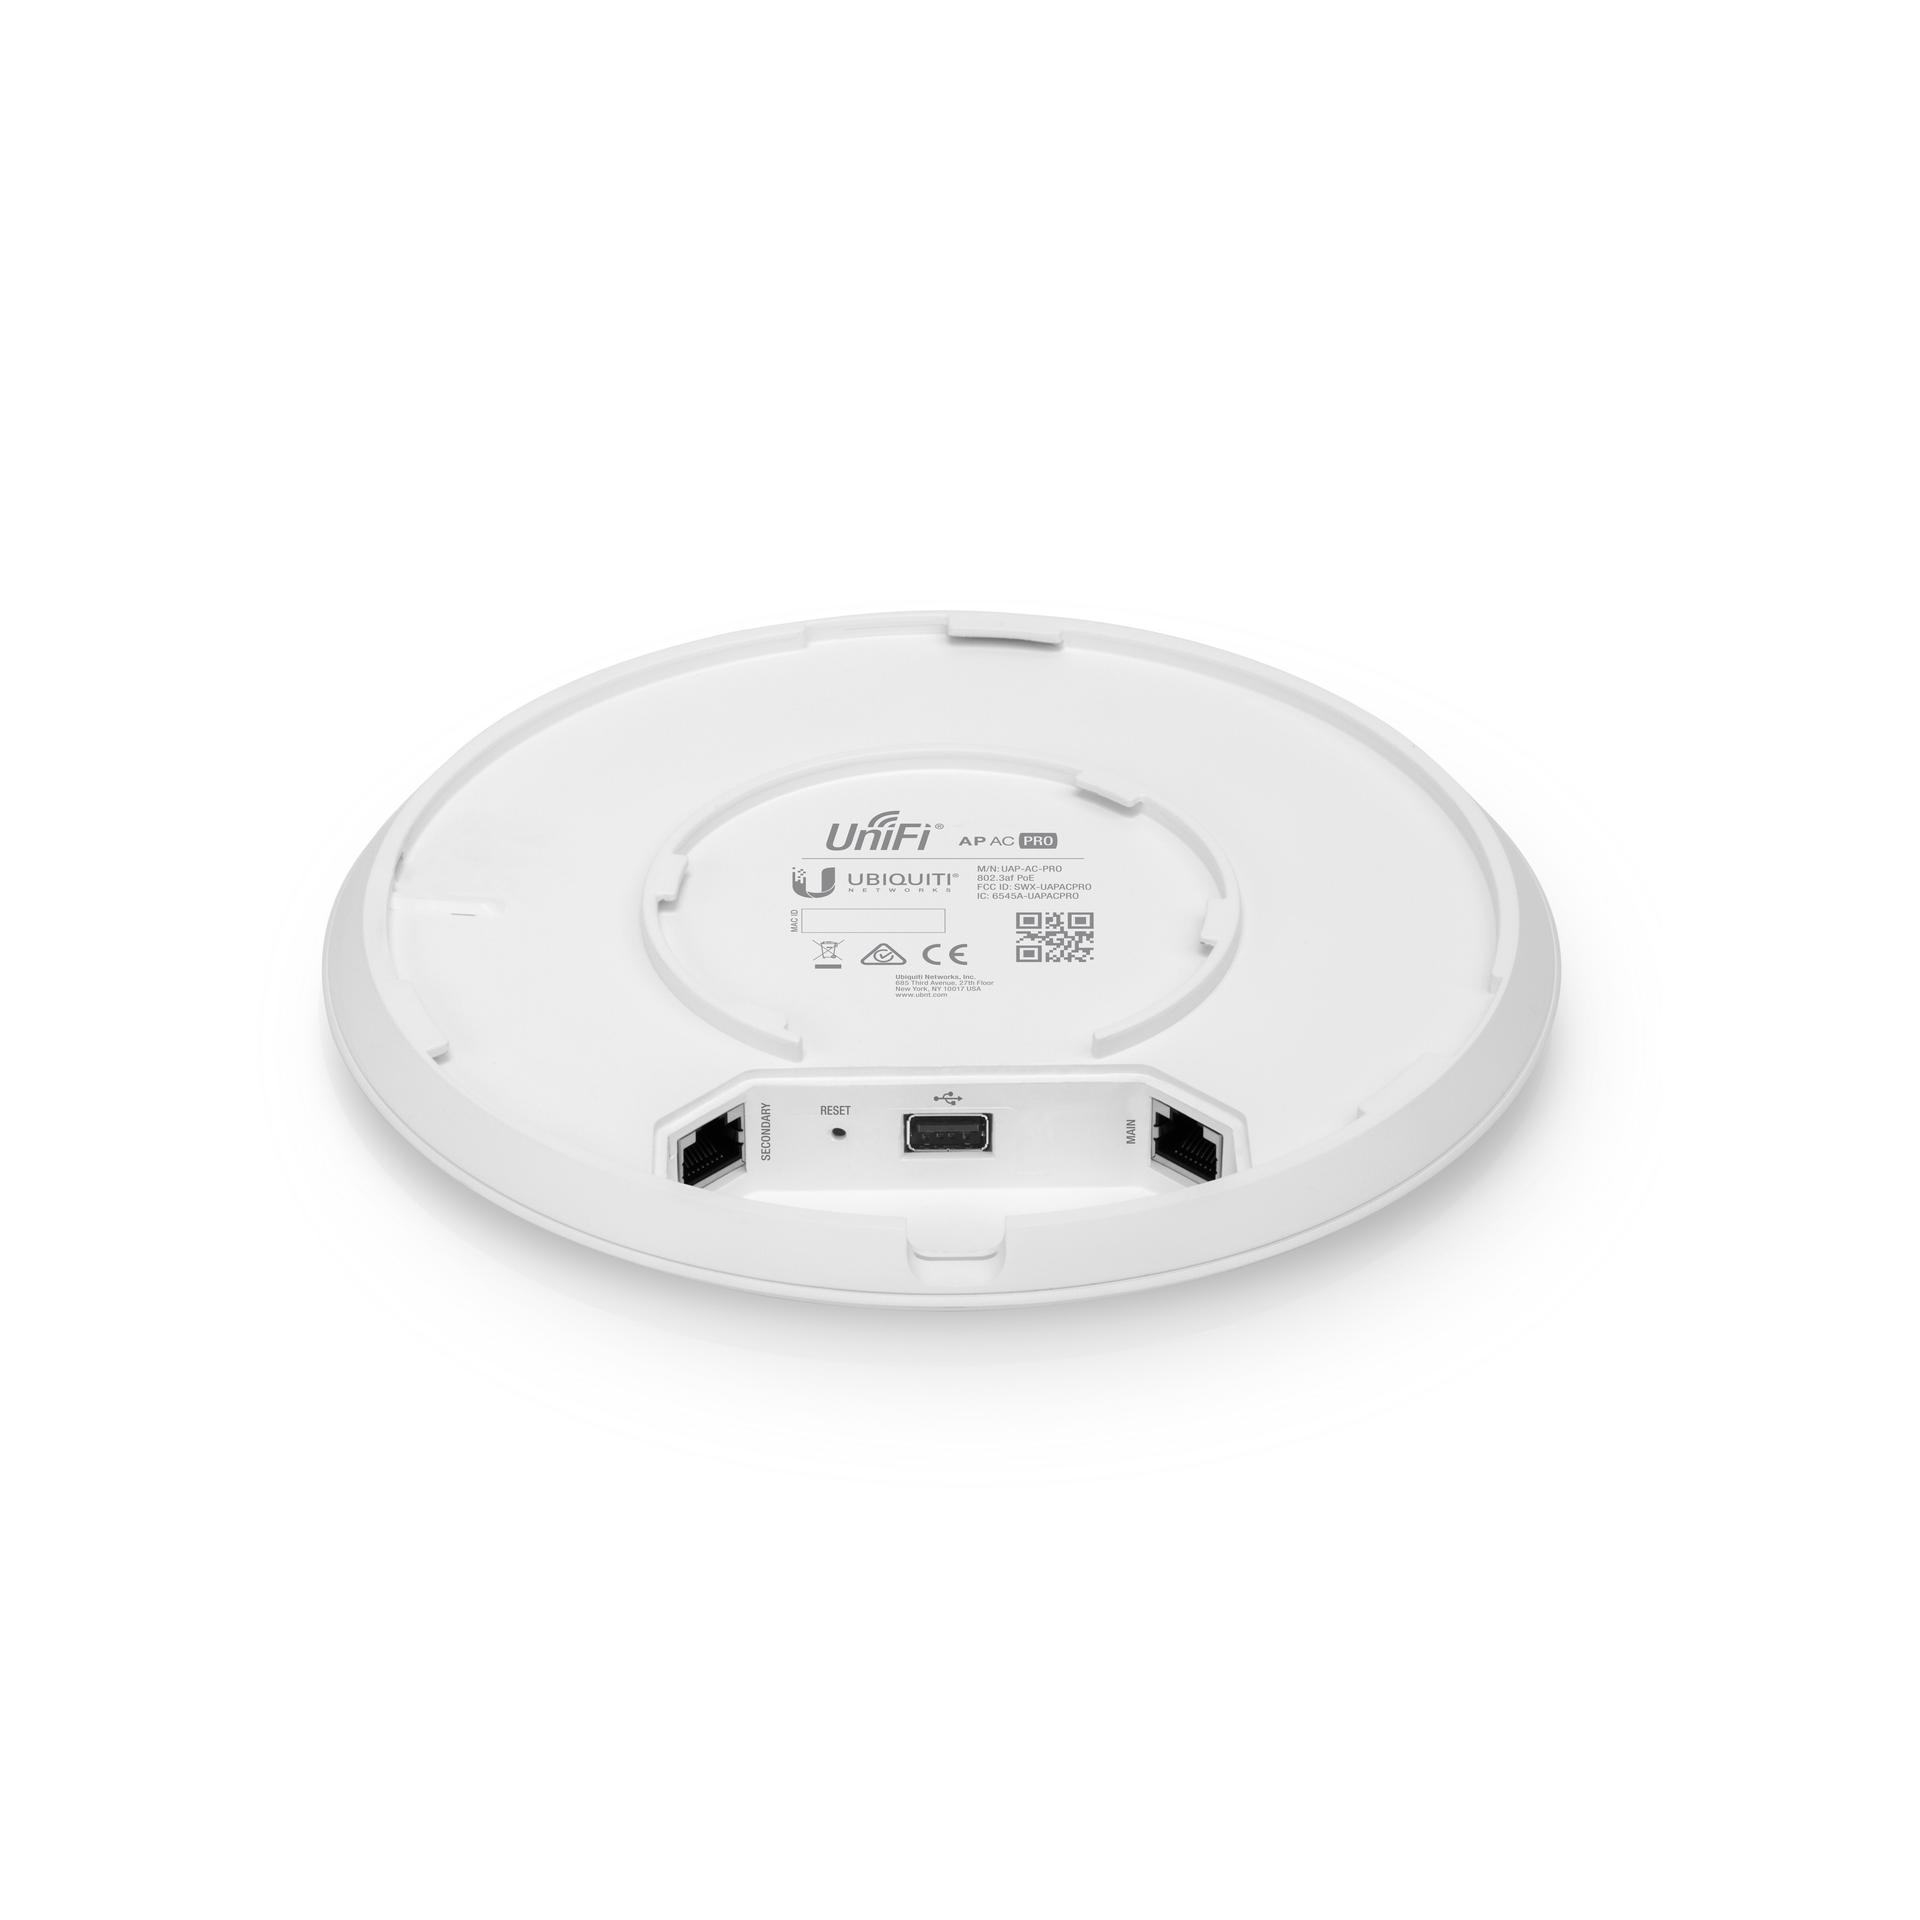 Ubiquiti UniFi UAP-AC-PRO WiFi 5 3x3 PoE Indoor/Outdoor Access Point Back View with Ports